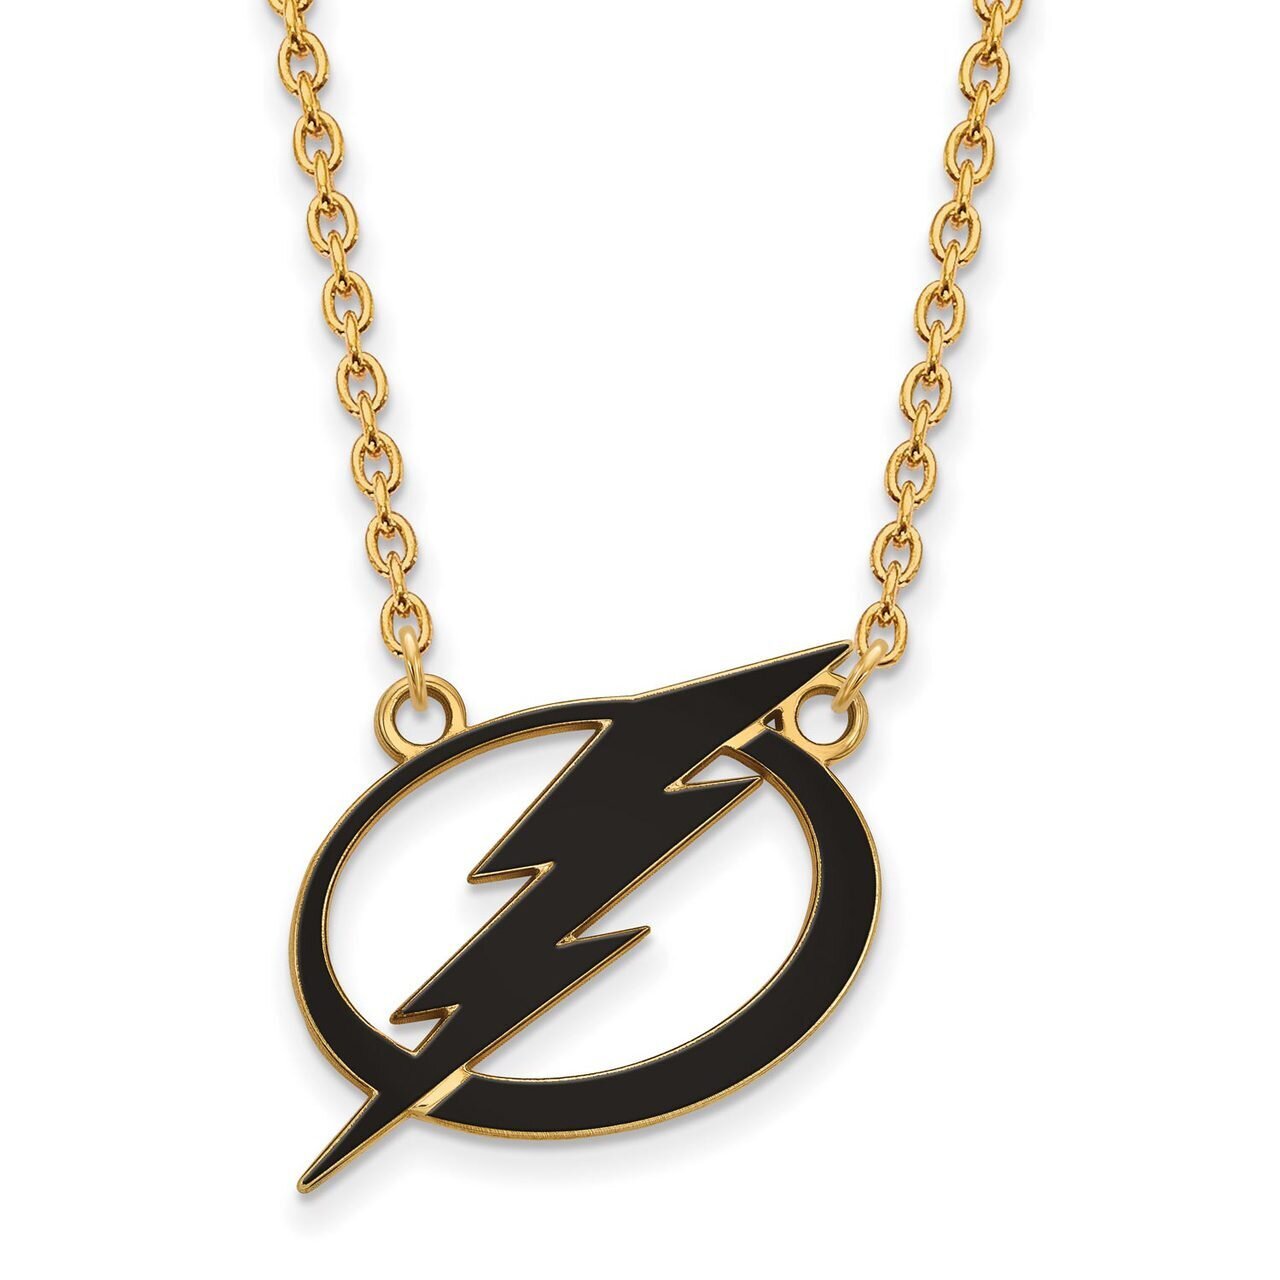 Tampa Bay Ligtning Large Enamel Pendant with Chain Necklace Gold-plated Silver GP039LIG-18